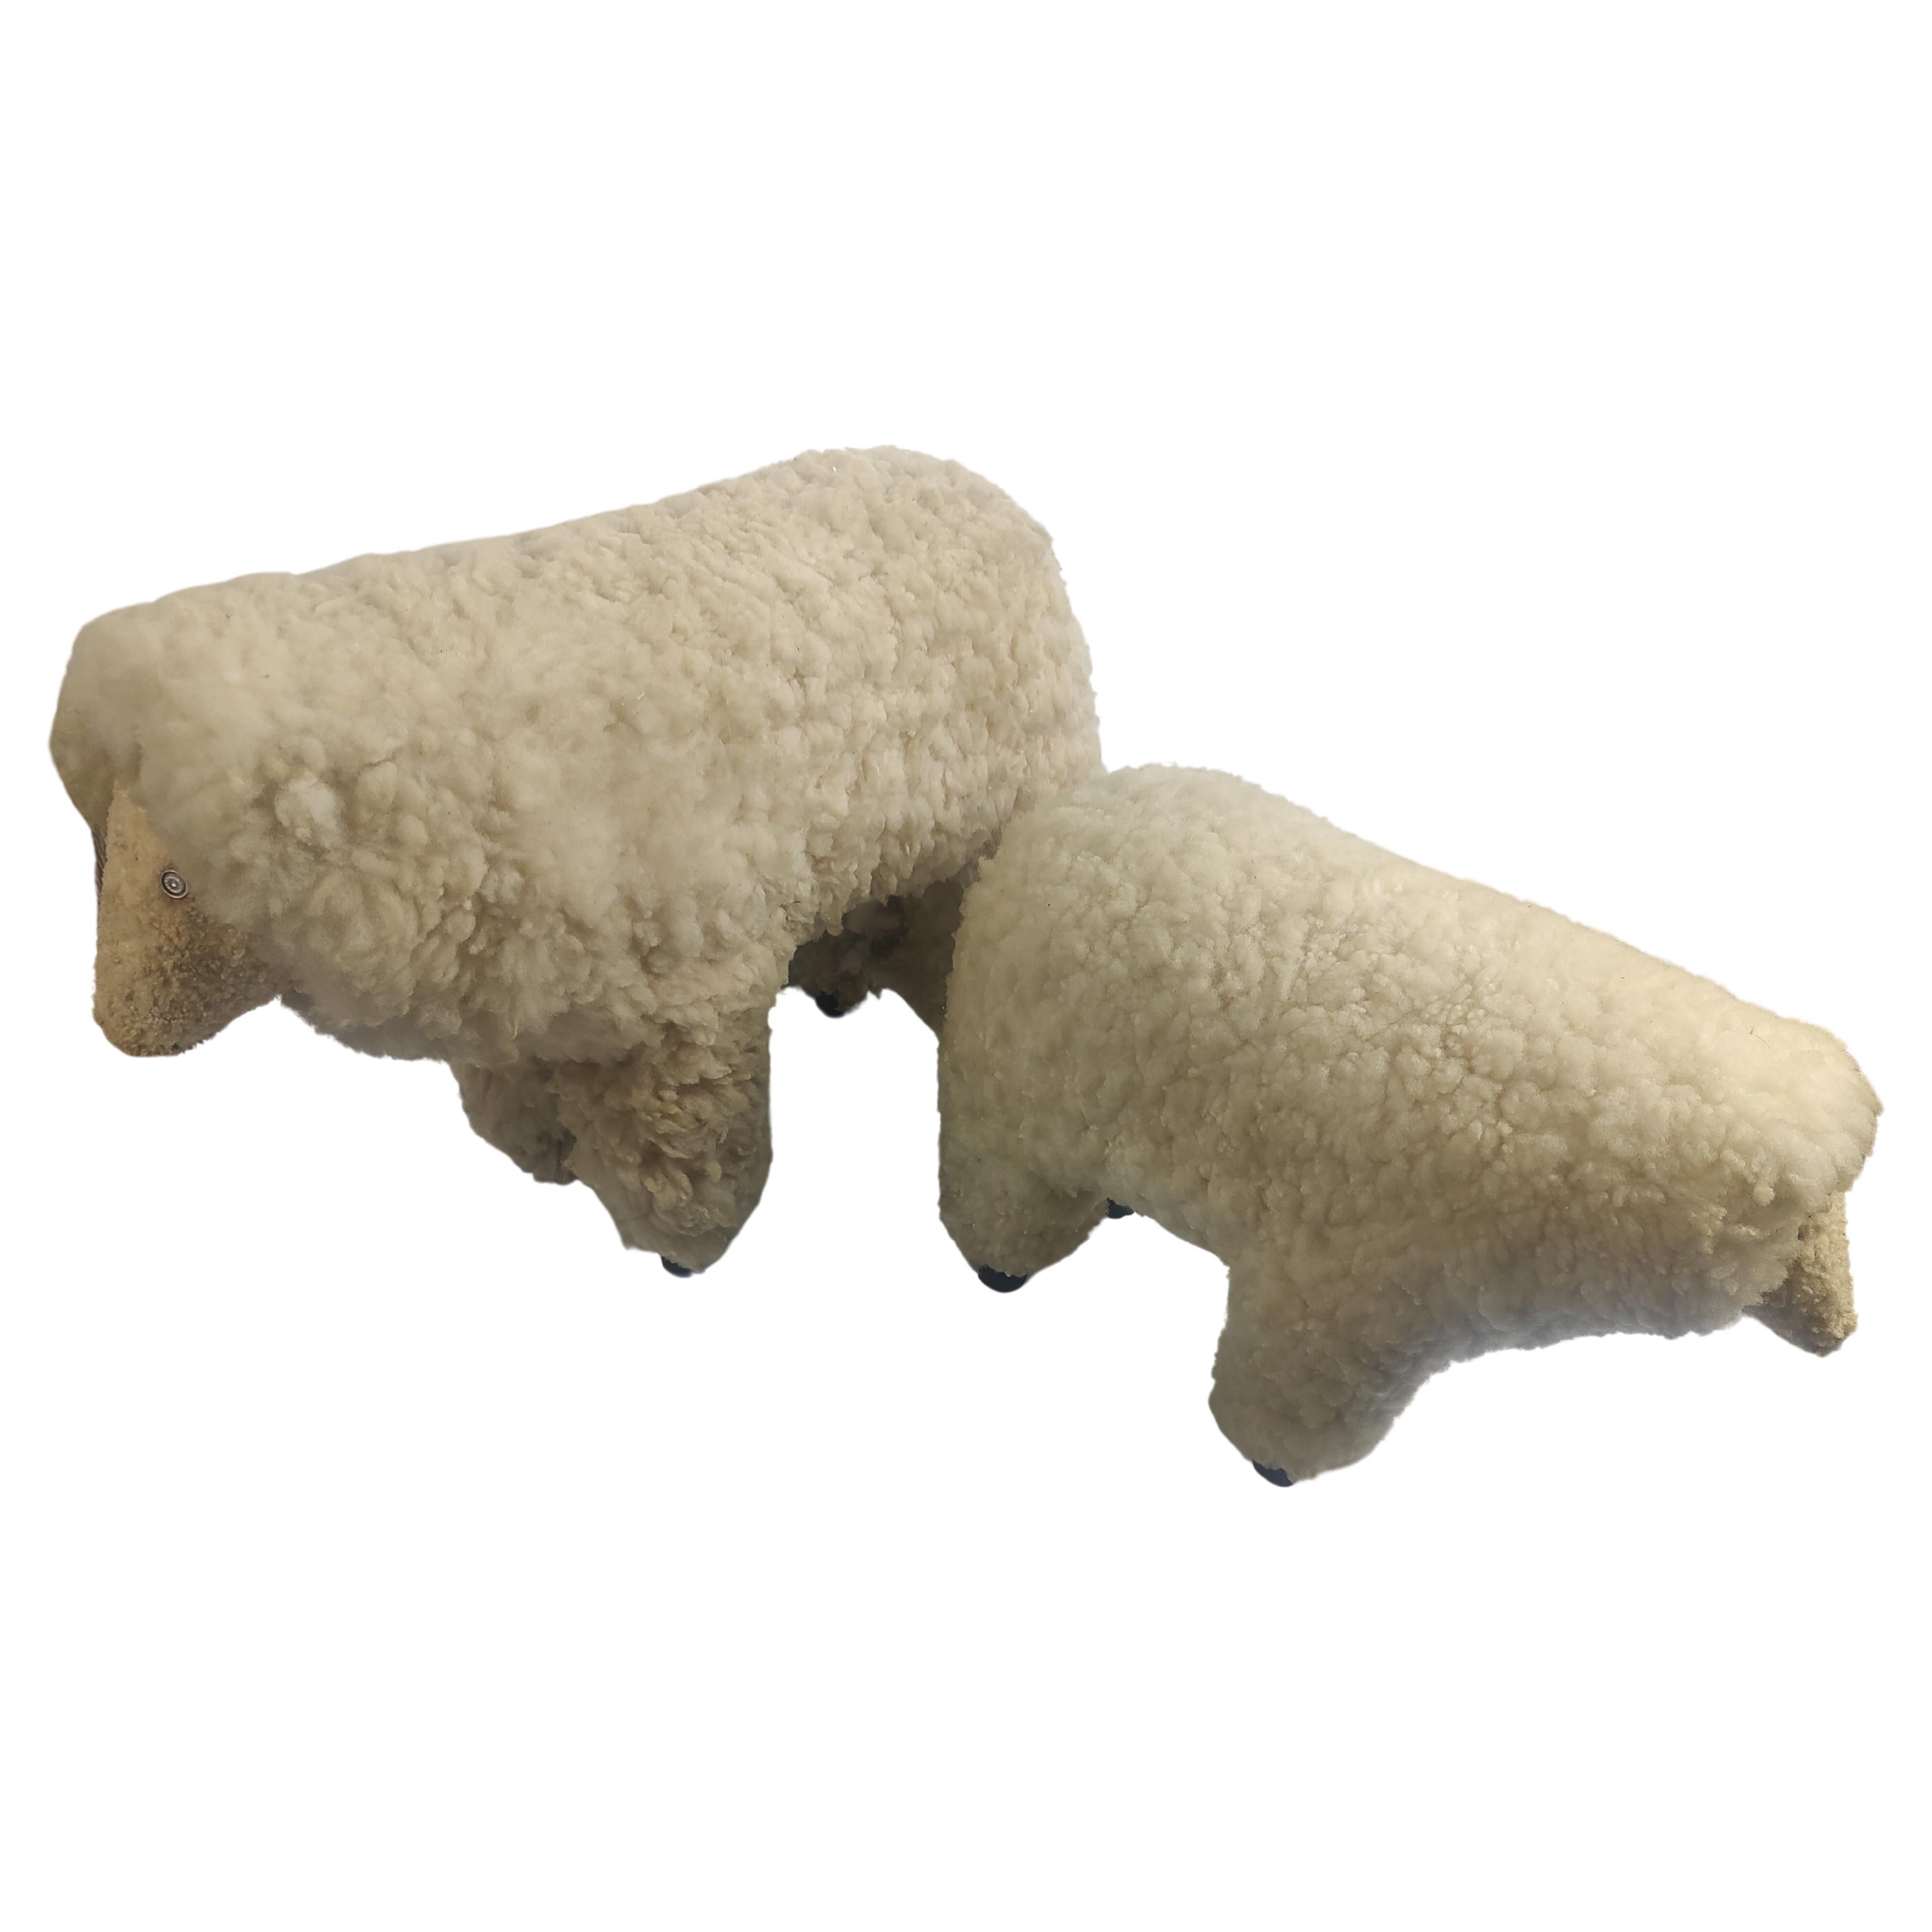 Pair of Sheep Sculptures Style of a French Artist C1985 In Good Condition For Sale In Port Jervis, NY